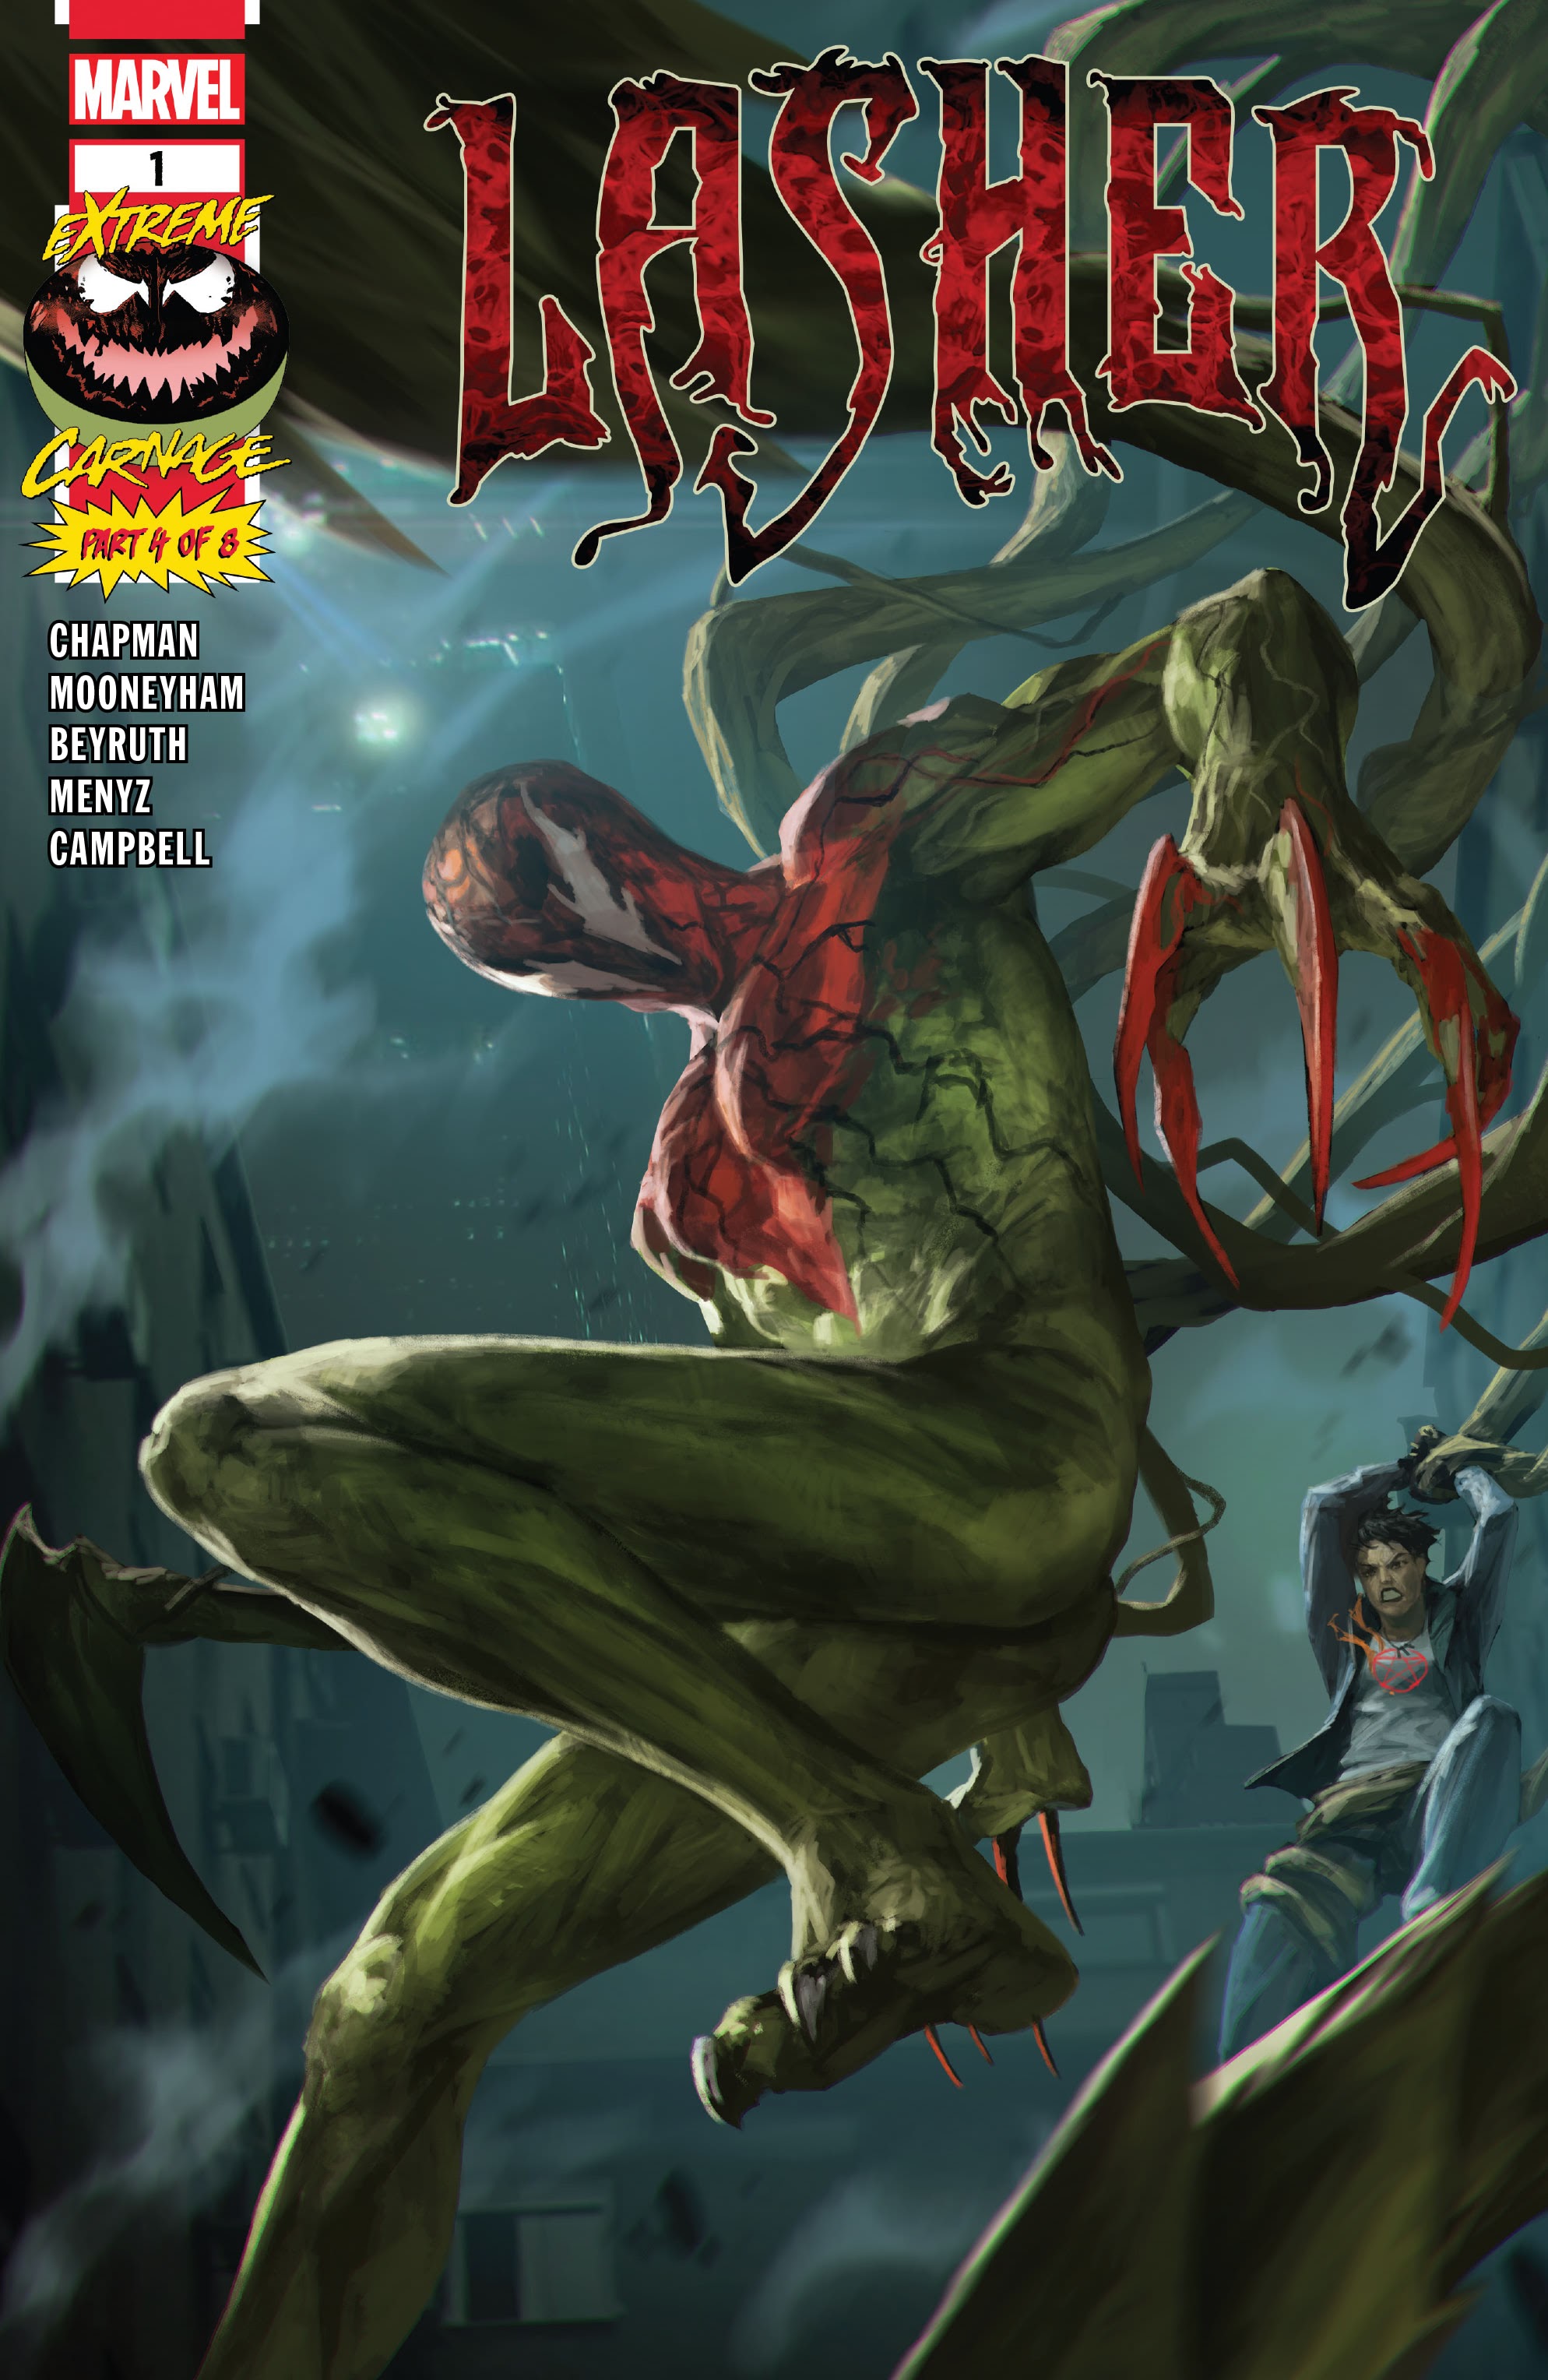 Read online Extreme Carnage comic -  Issue # Lasher - 1